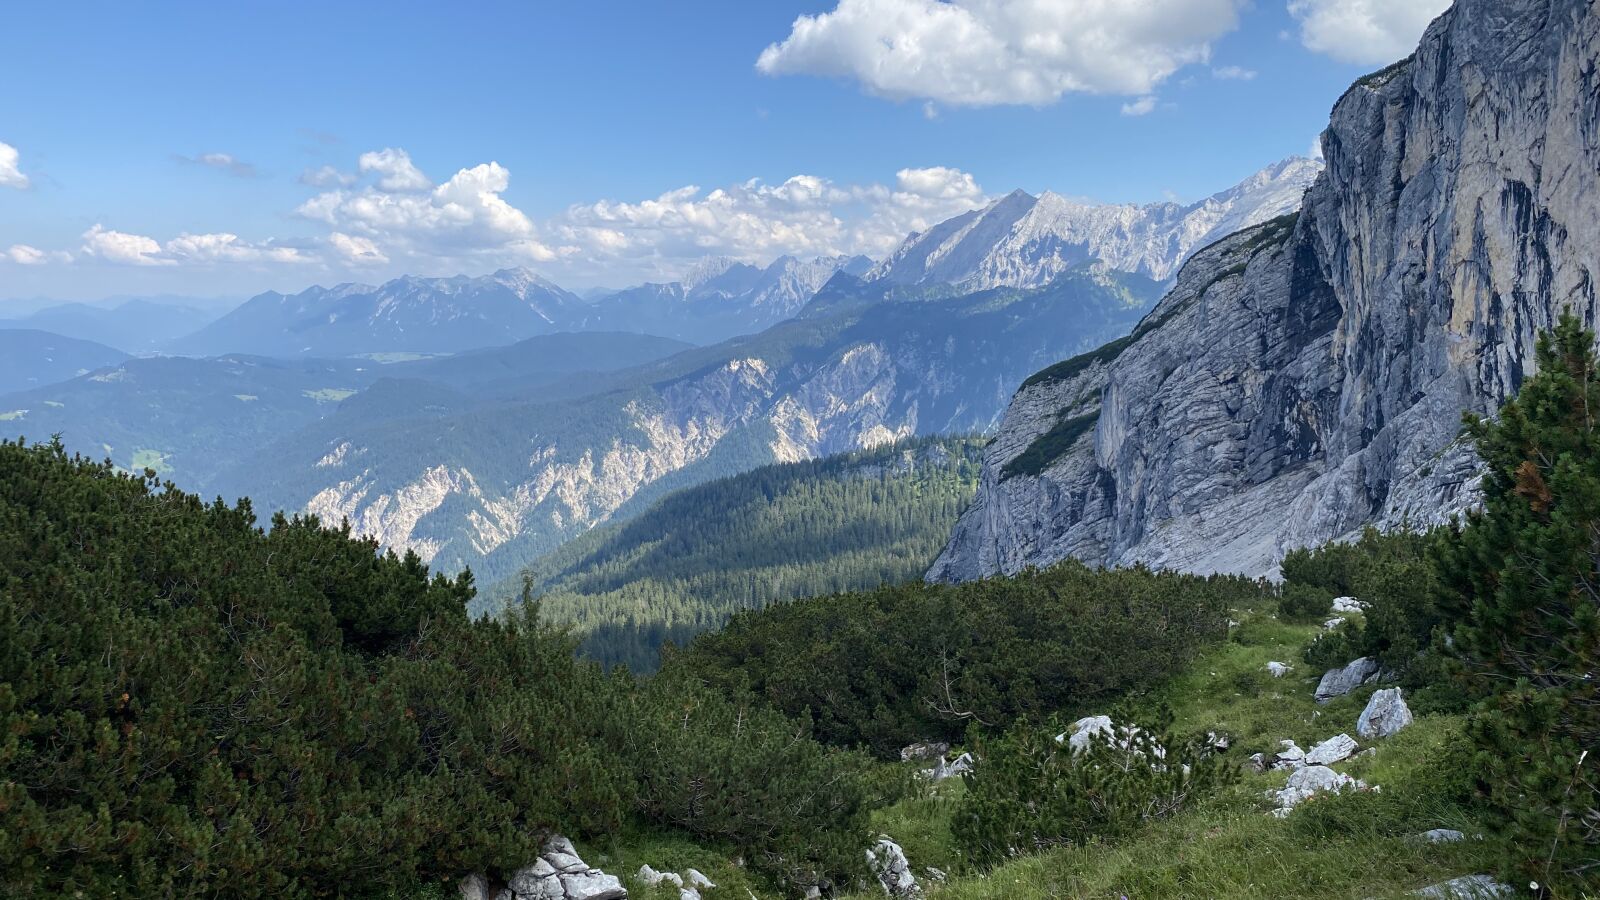 Apple iPhone 11 Pro Max sample photo. Mountains, summit, forest photography